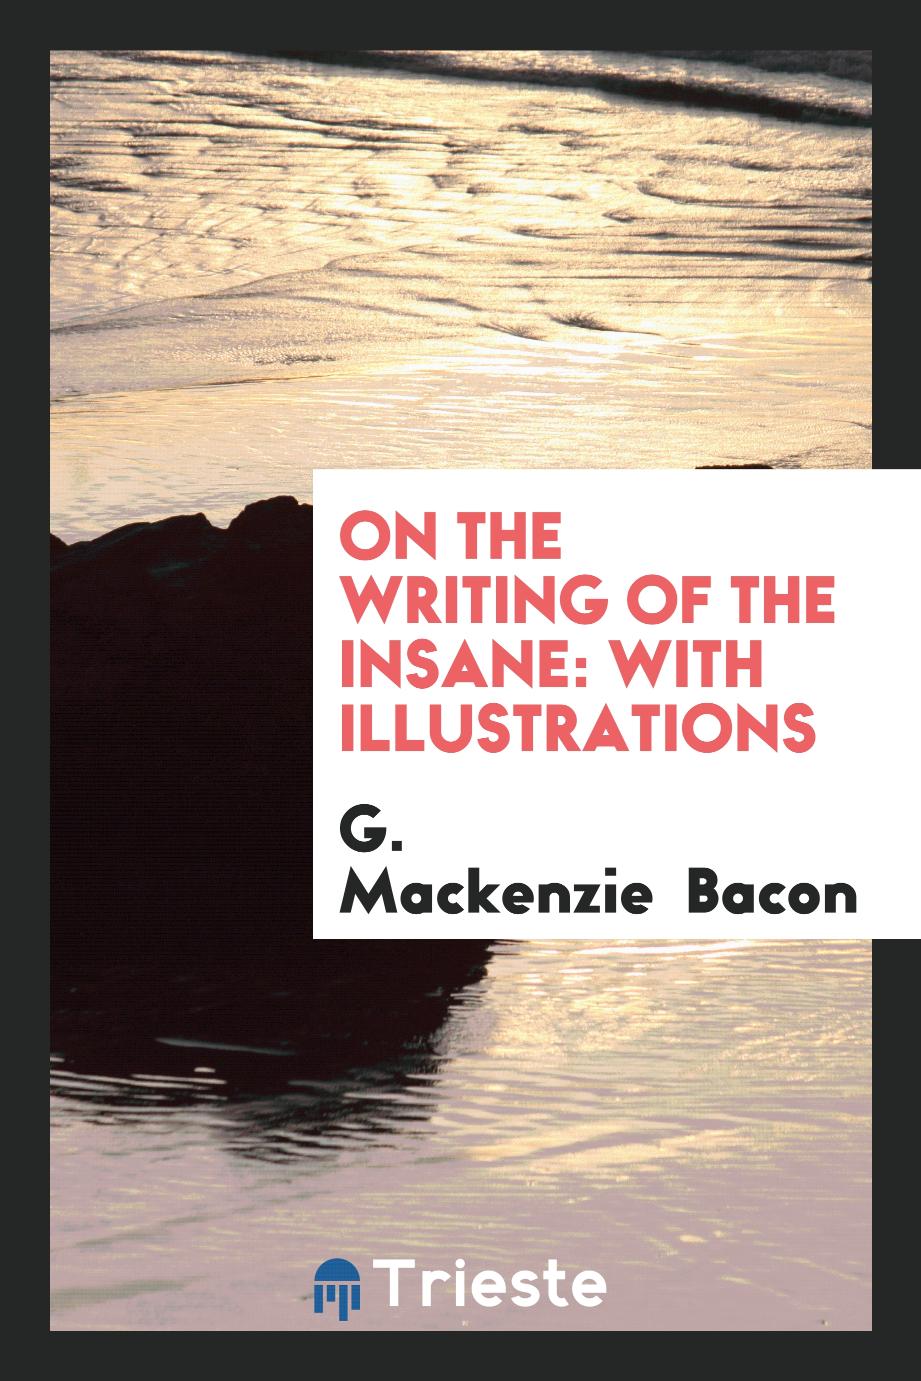 On the writing of the insane: with illustrations